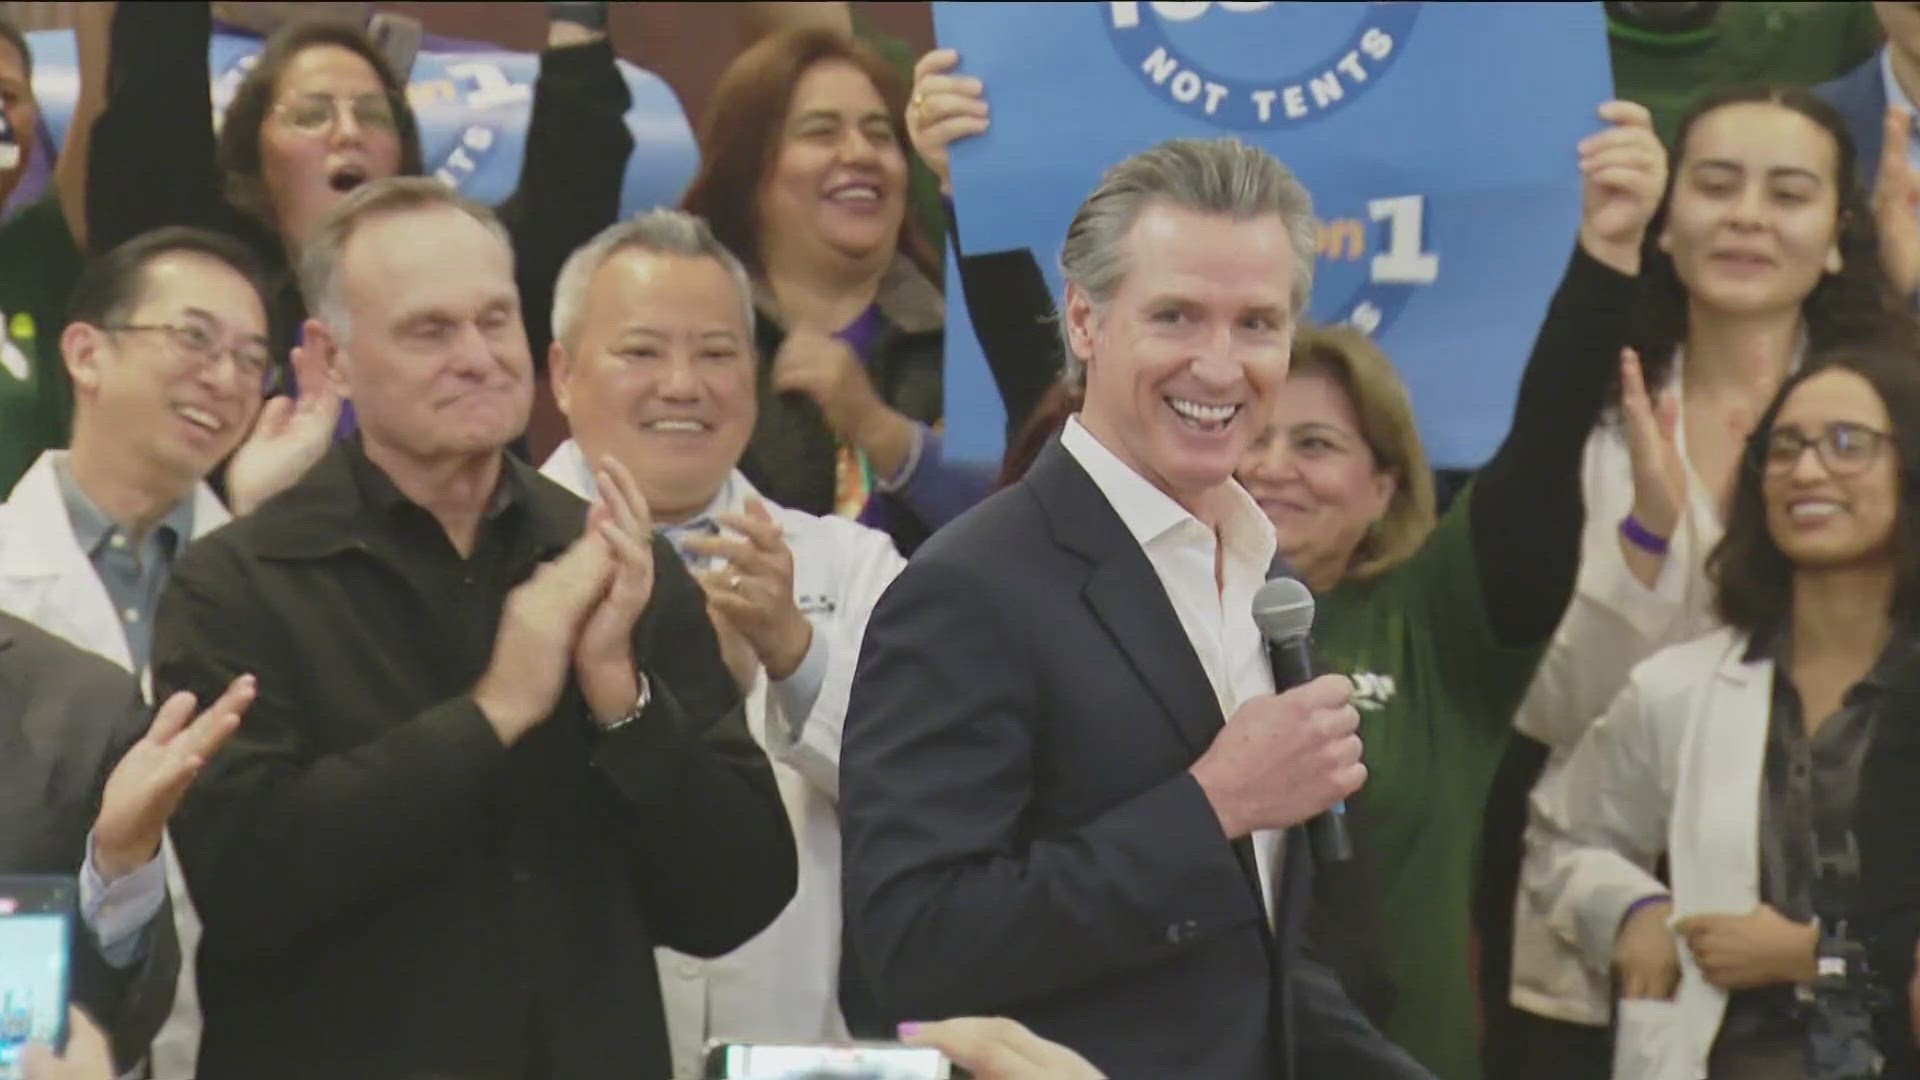 A Bloomberg report claims Newsom pushed for an exemption to the state’s new fast food minimum wage law to benefit Panera Bread and campaign donor.